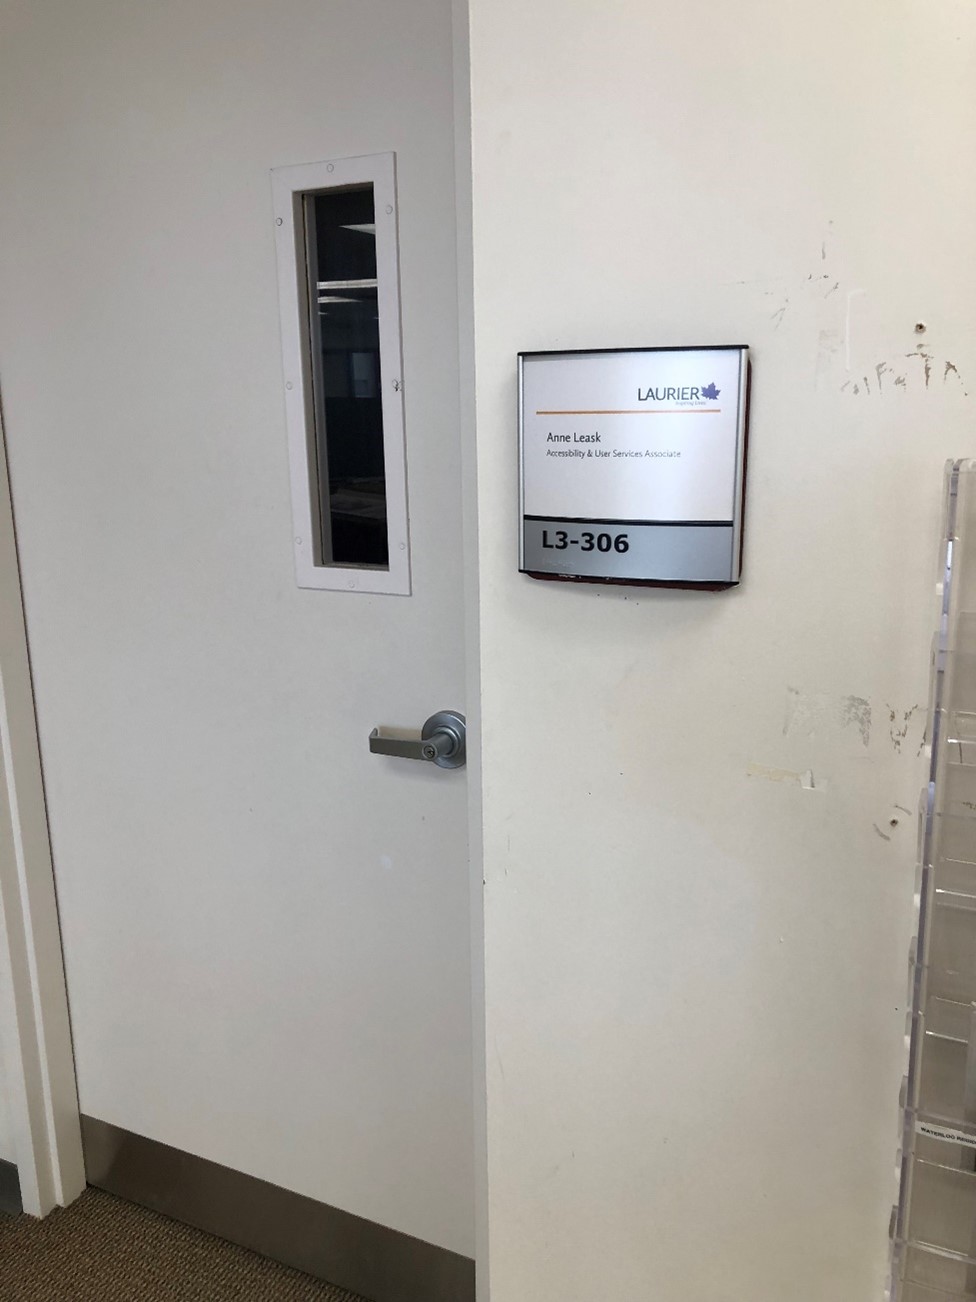 A door with label L3-306. It has braille for the room number. The name is Anne Leask, Accessibility and User Services Associate. There is a narrow window in the door.